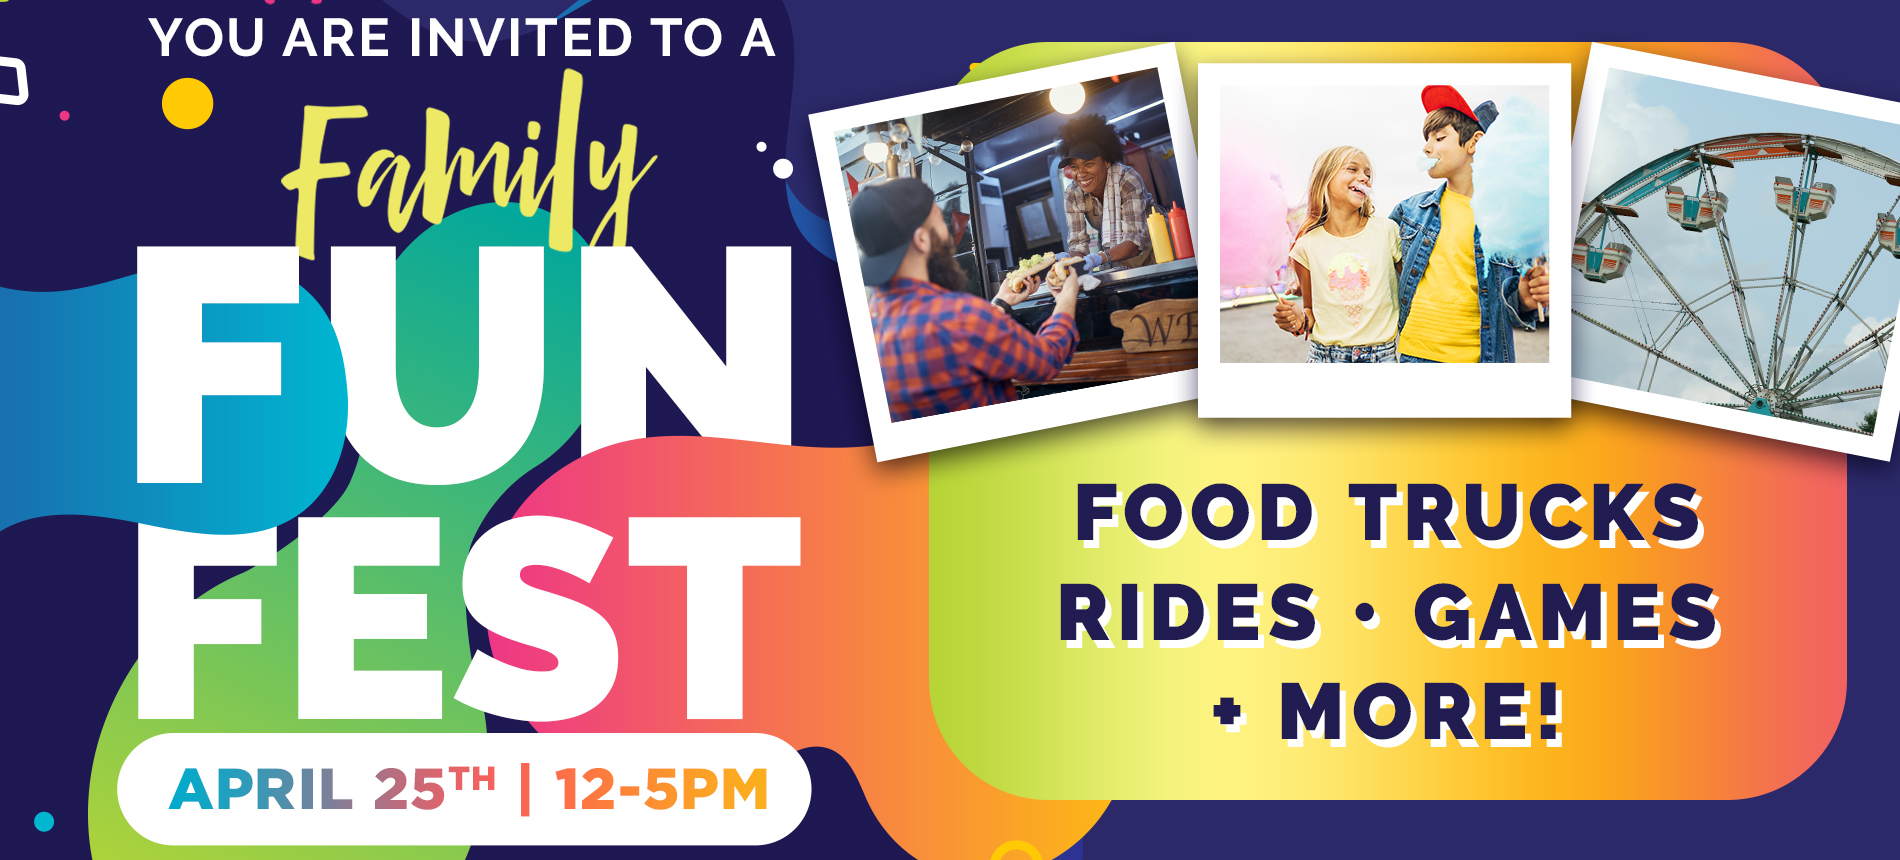 World Harvest Church Invites You to a Family Fun Fest April 11th 12- 8 Pm Food Trucks Rides Games More! World Harvest Church 1610 S. Nappanee St, Elkhart Indiana 46516